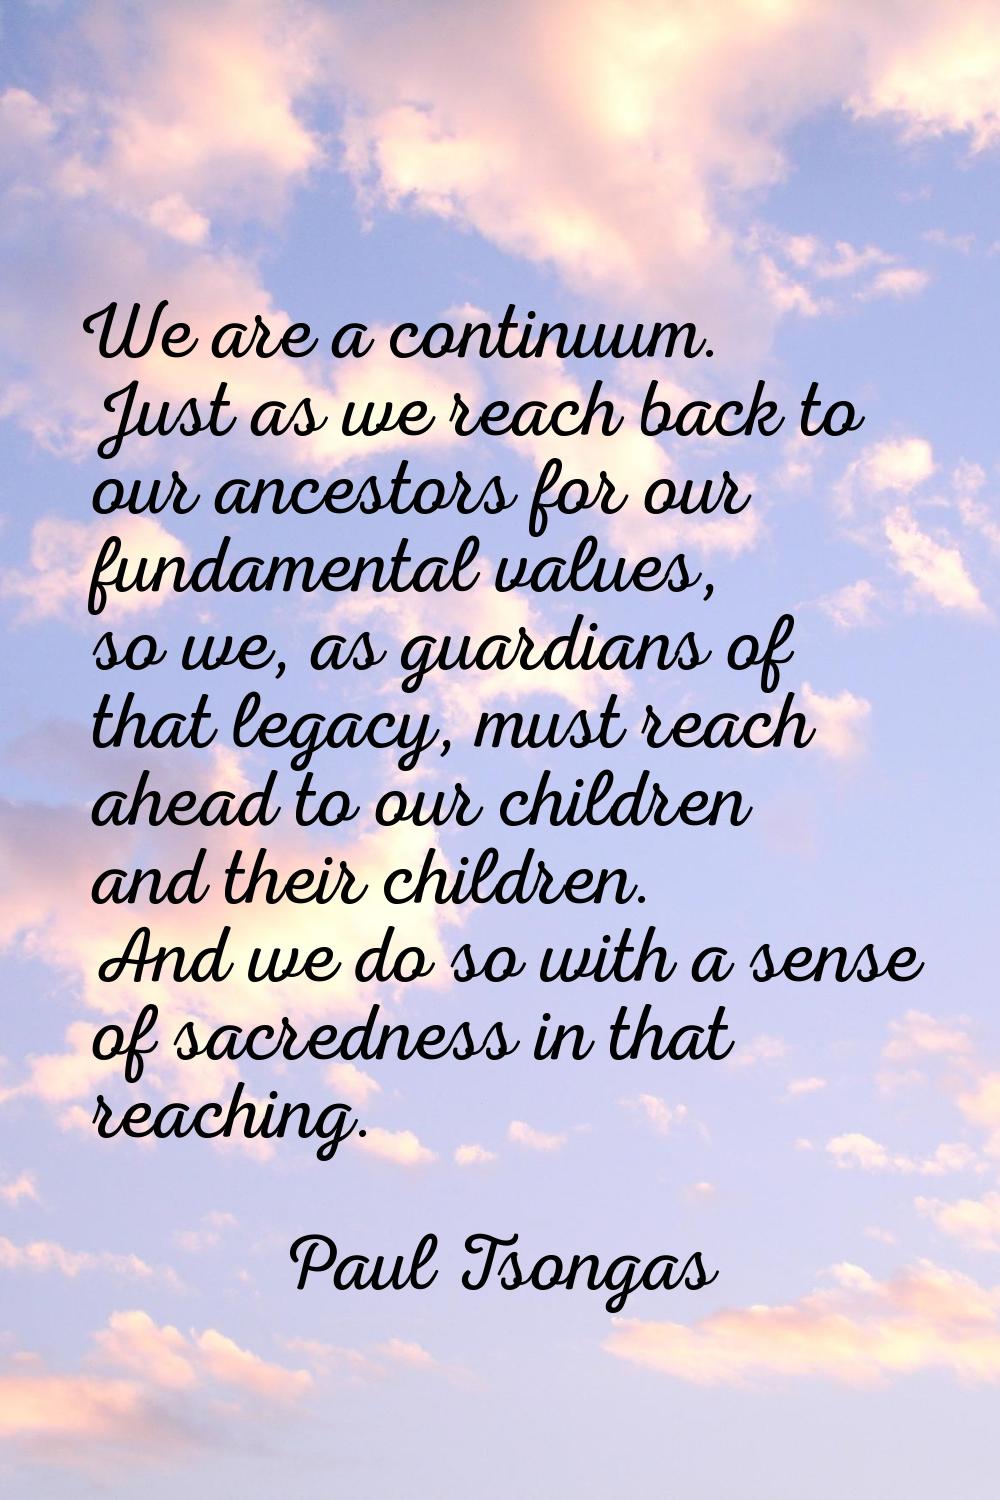 We are a continuum. Just as we reach back to our ancestors for our fundamental values, so we, as gu